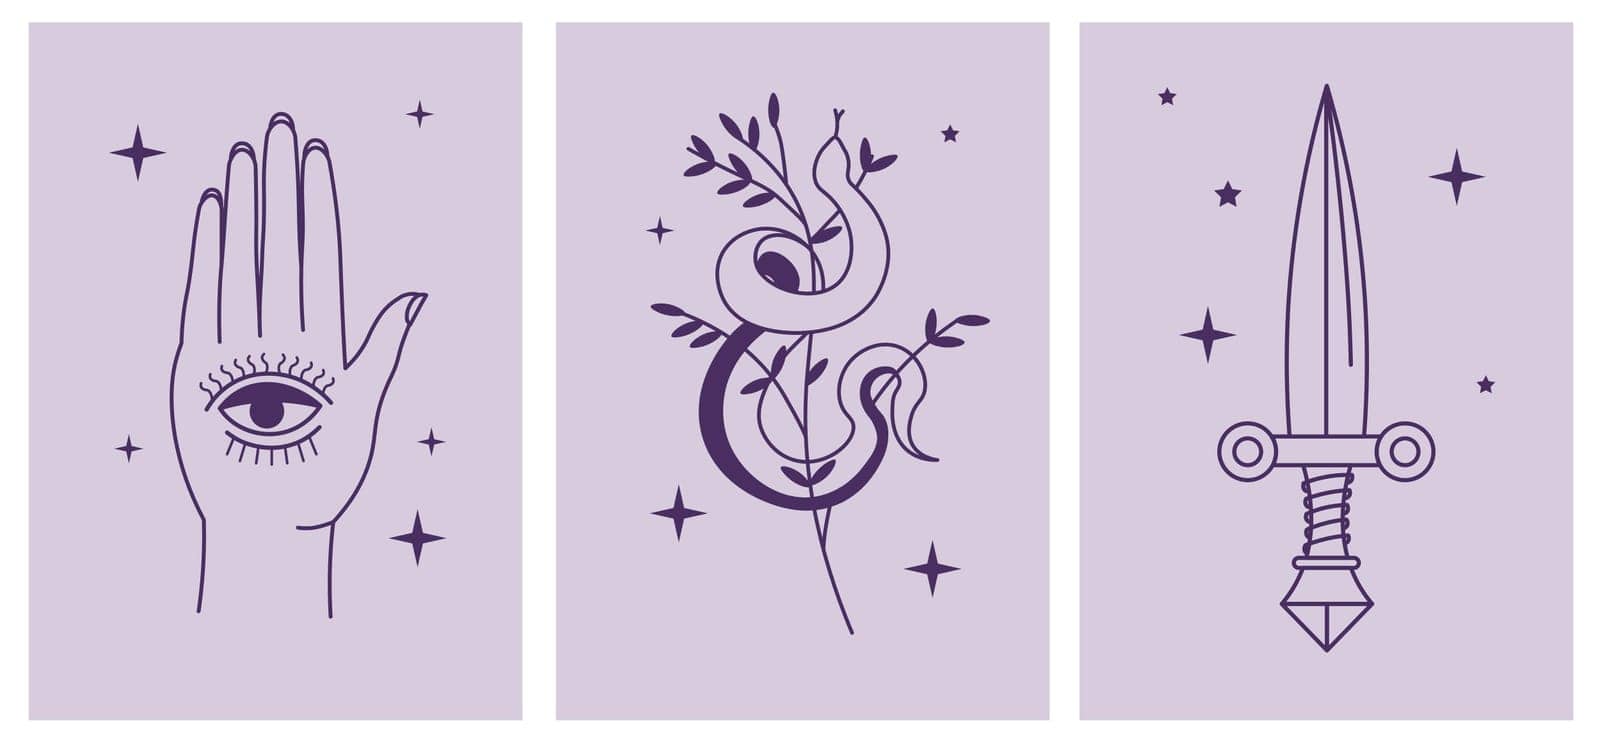 Mystic signs, hand with eye, snake and dagger by Sonulkaster